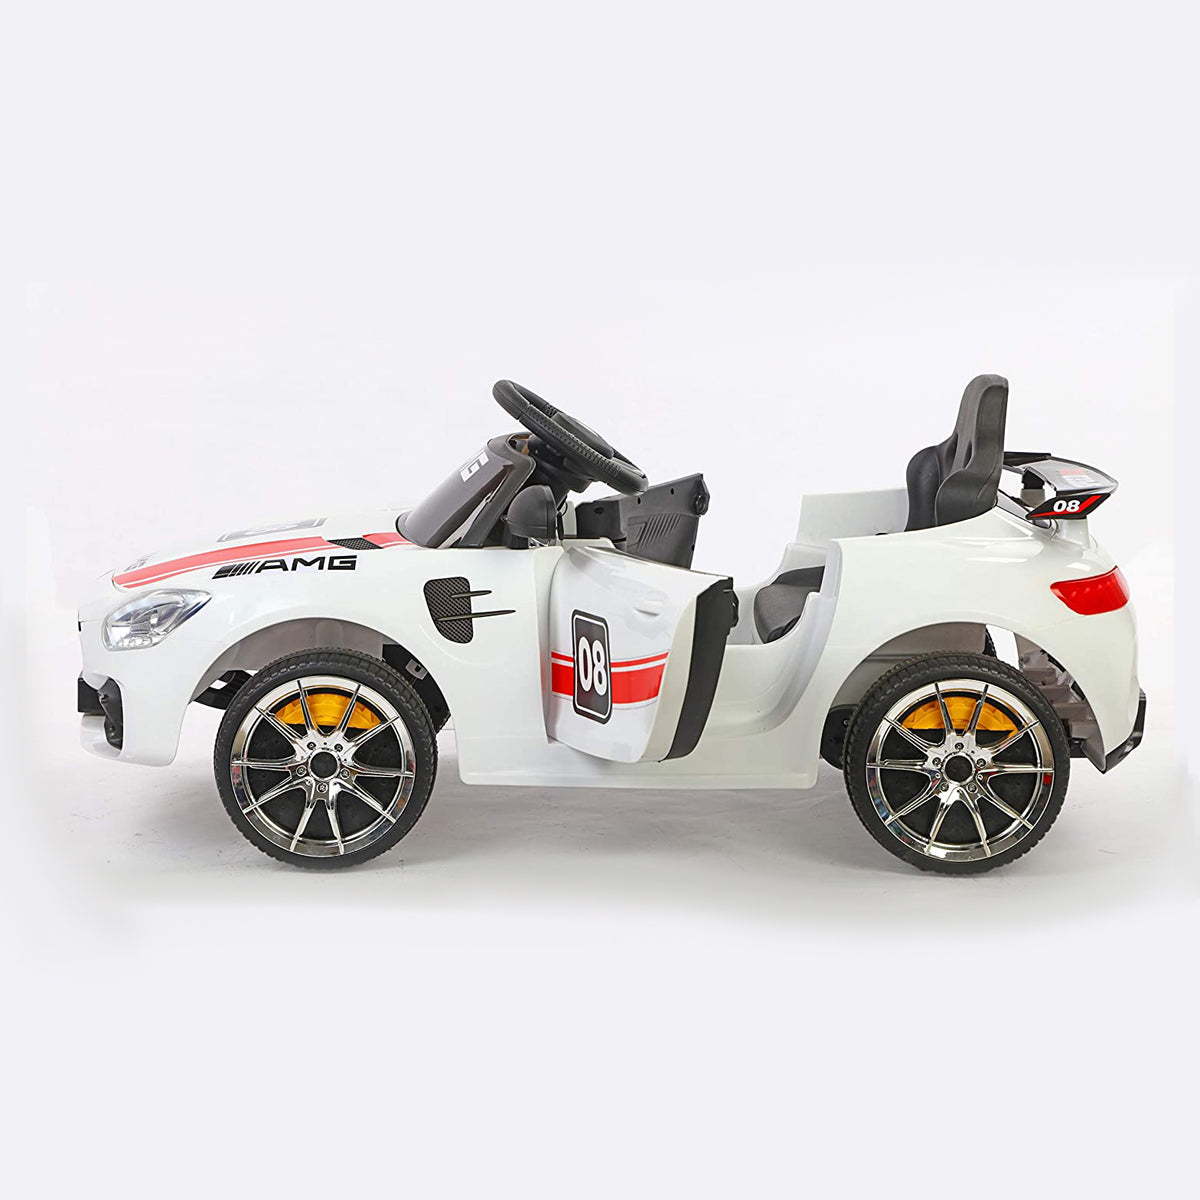 Fliptoy™ | Mercedes kids car | Rechargeable Battery Operated Ride on car for Kids FLP-8514